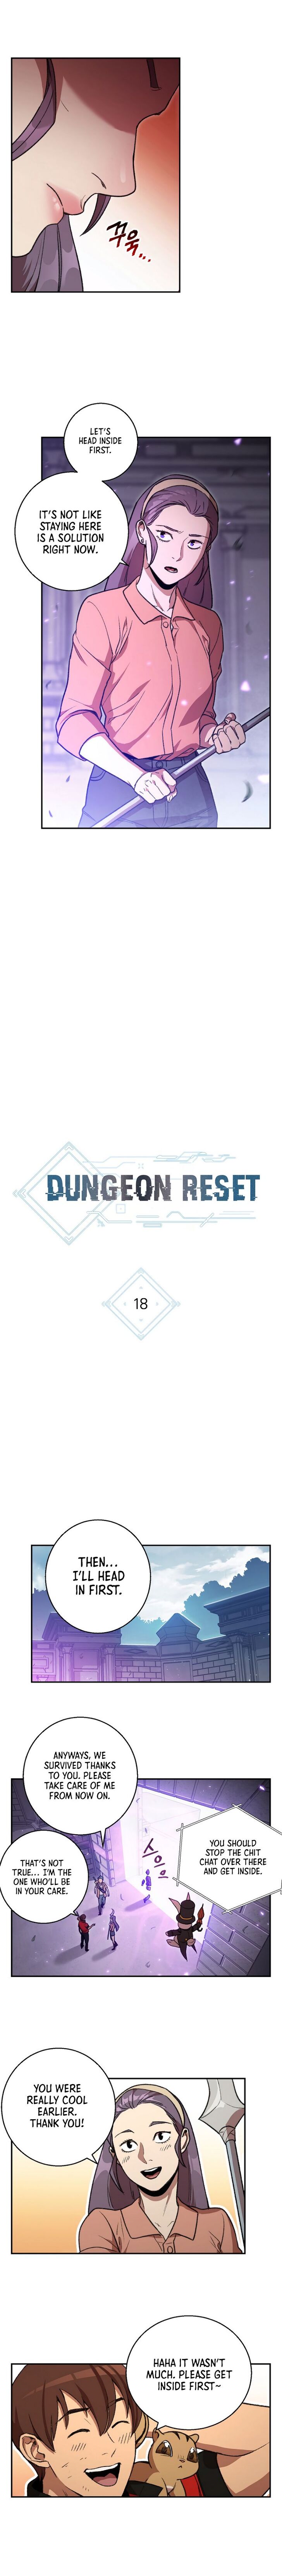 Dungeon Reset chapter 0.018